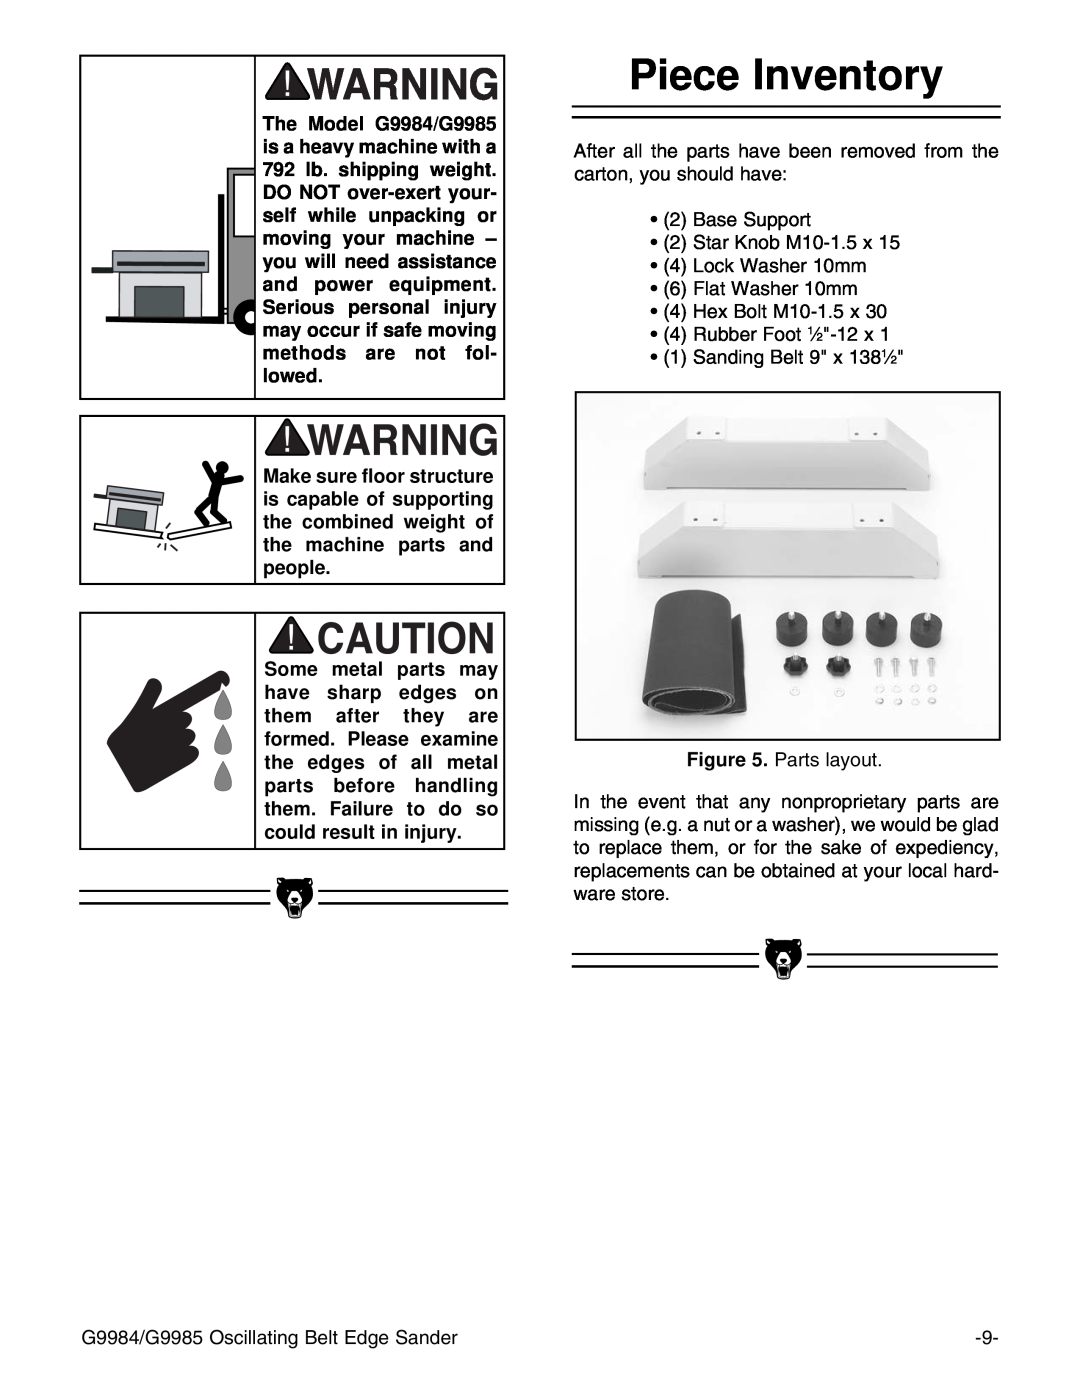 Grizzly G9985, G9984 instruction manual Piece Inventory 